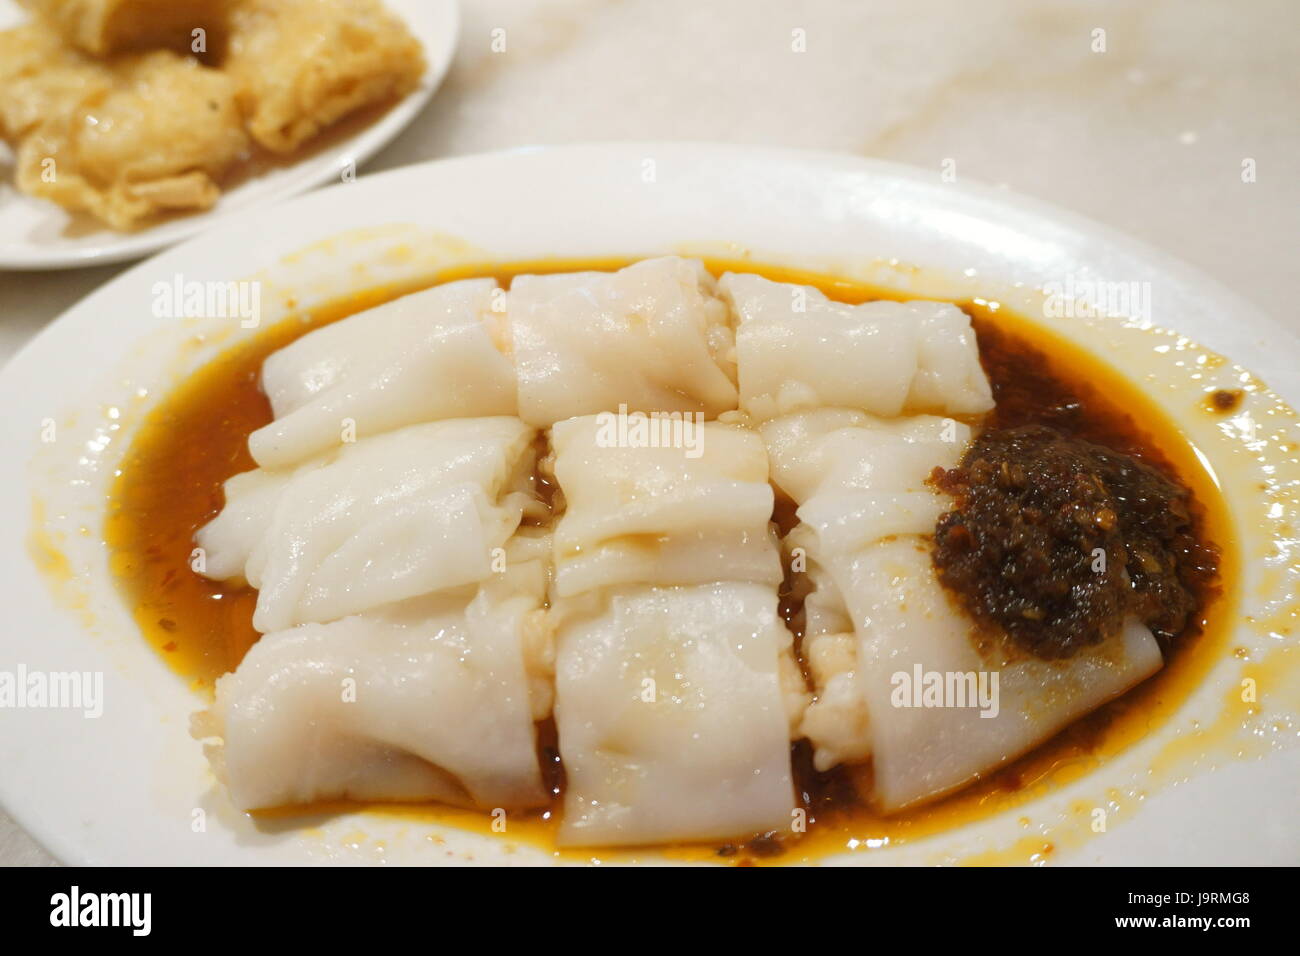 chee cheong fun, rice noodle roll a Cantonese dish from southern China including Hong Kong Stock Photo